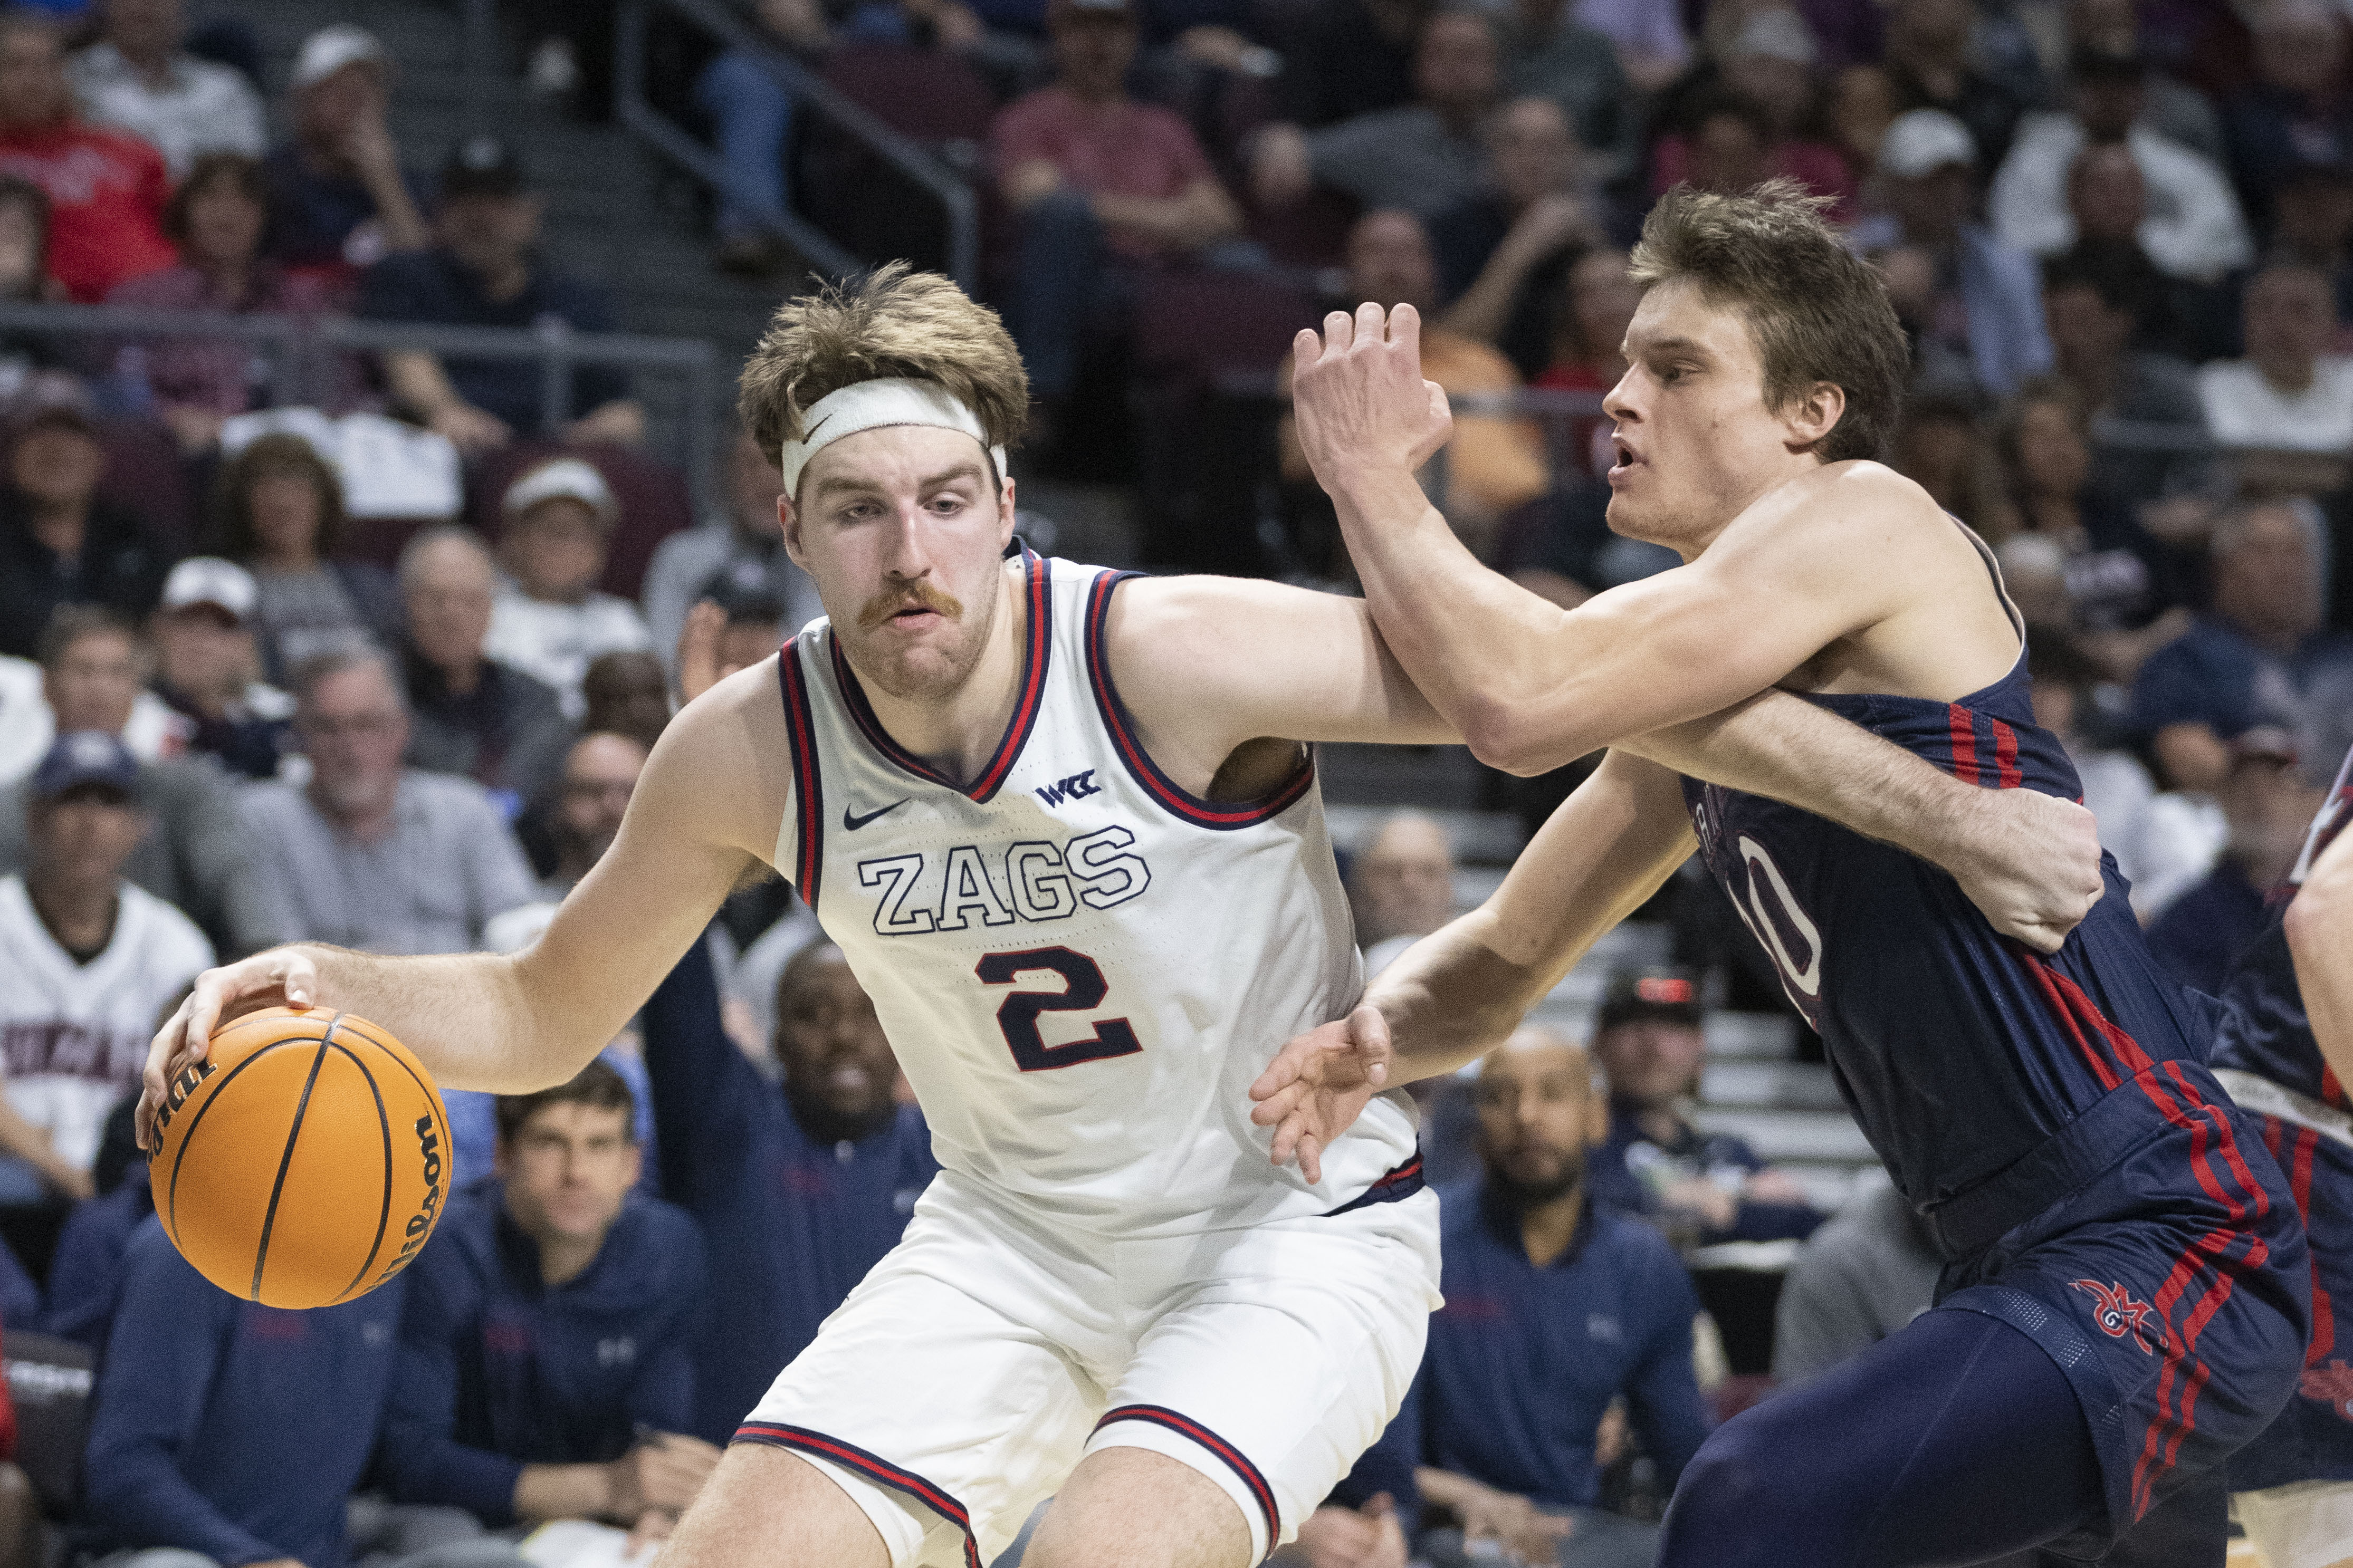 Gonzaga Bulldogs forward Drew Timme (2) dribbles the basketball against Saint Mary’s Gaels center Mitchell Saxen (10) during the first half in the finals of the WCC Basketball Championships at Orleans Arena.